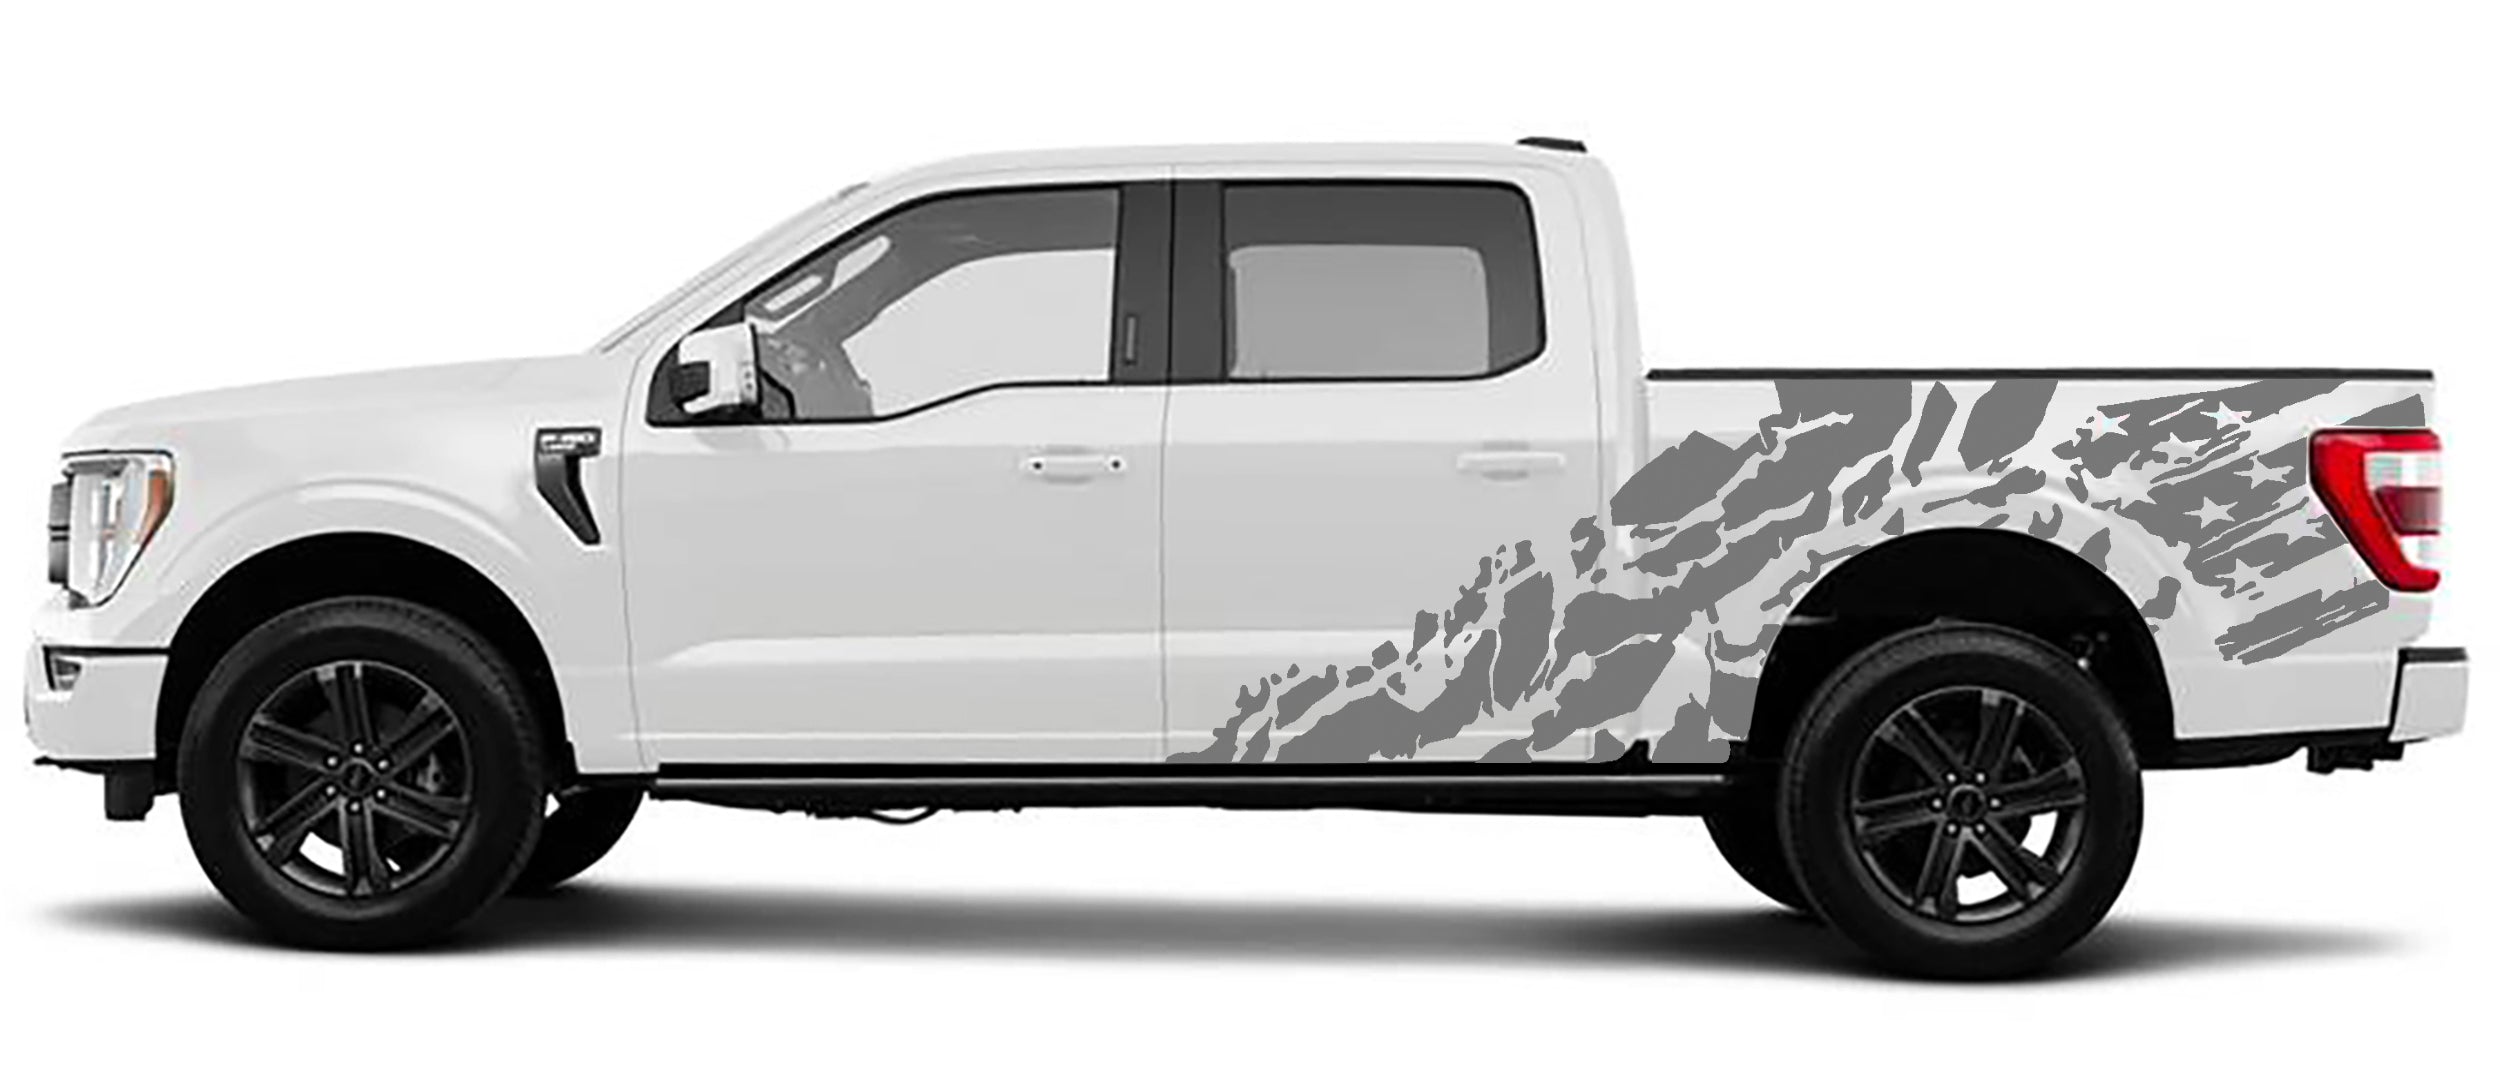 shredded american flag side graphics for ford f 150 2021 to 2023 models gray